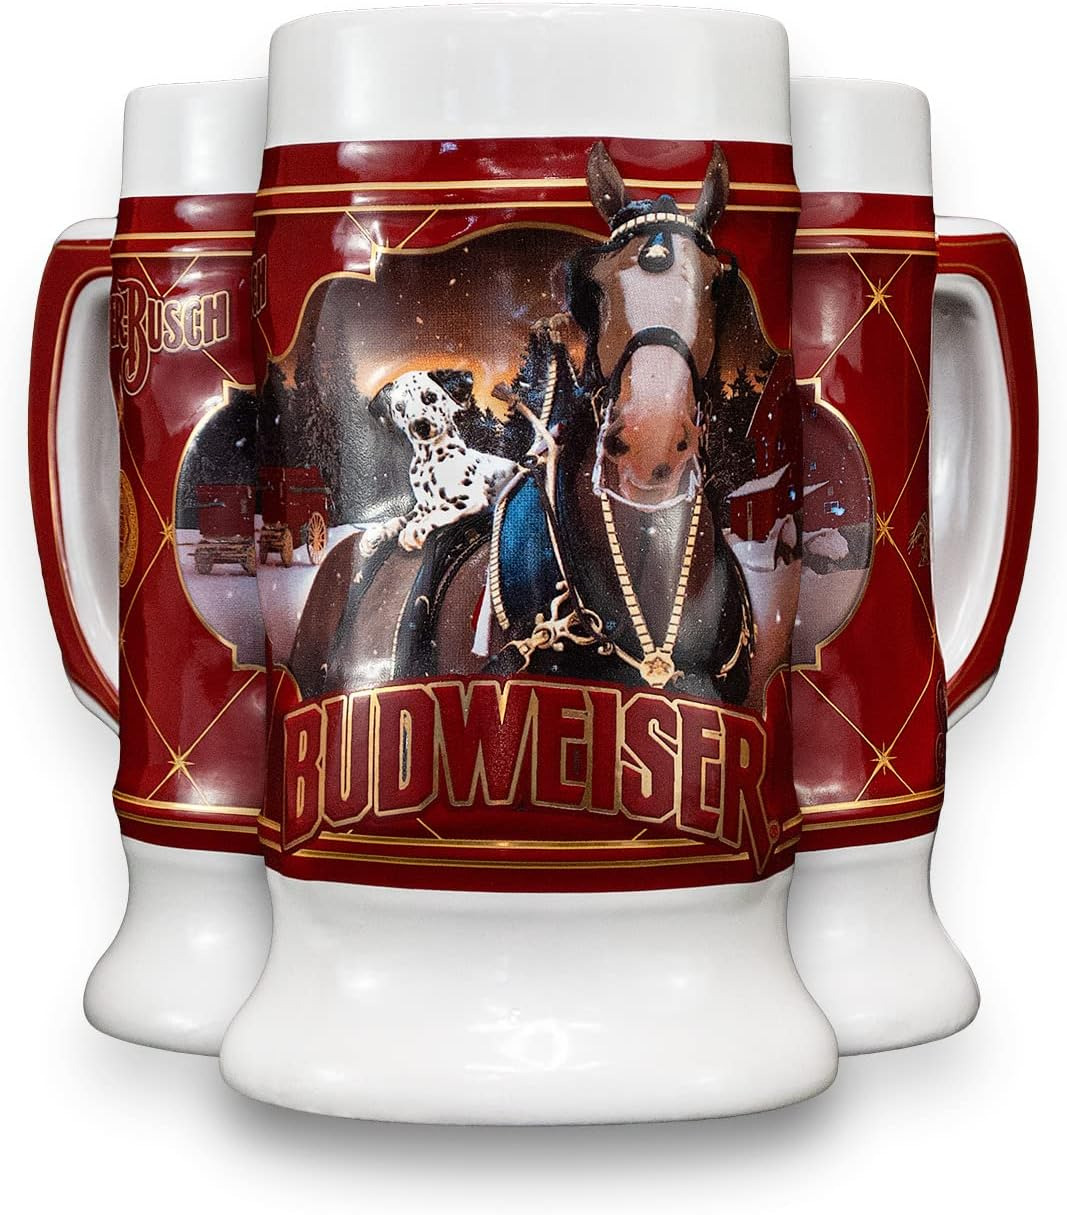 2022 Budweiser Limited Edition Collectors SERIES #43 Clydesdale Holiday Stein - 